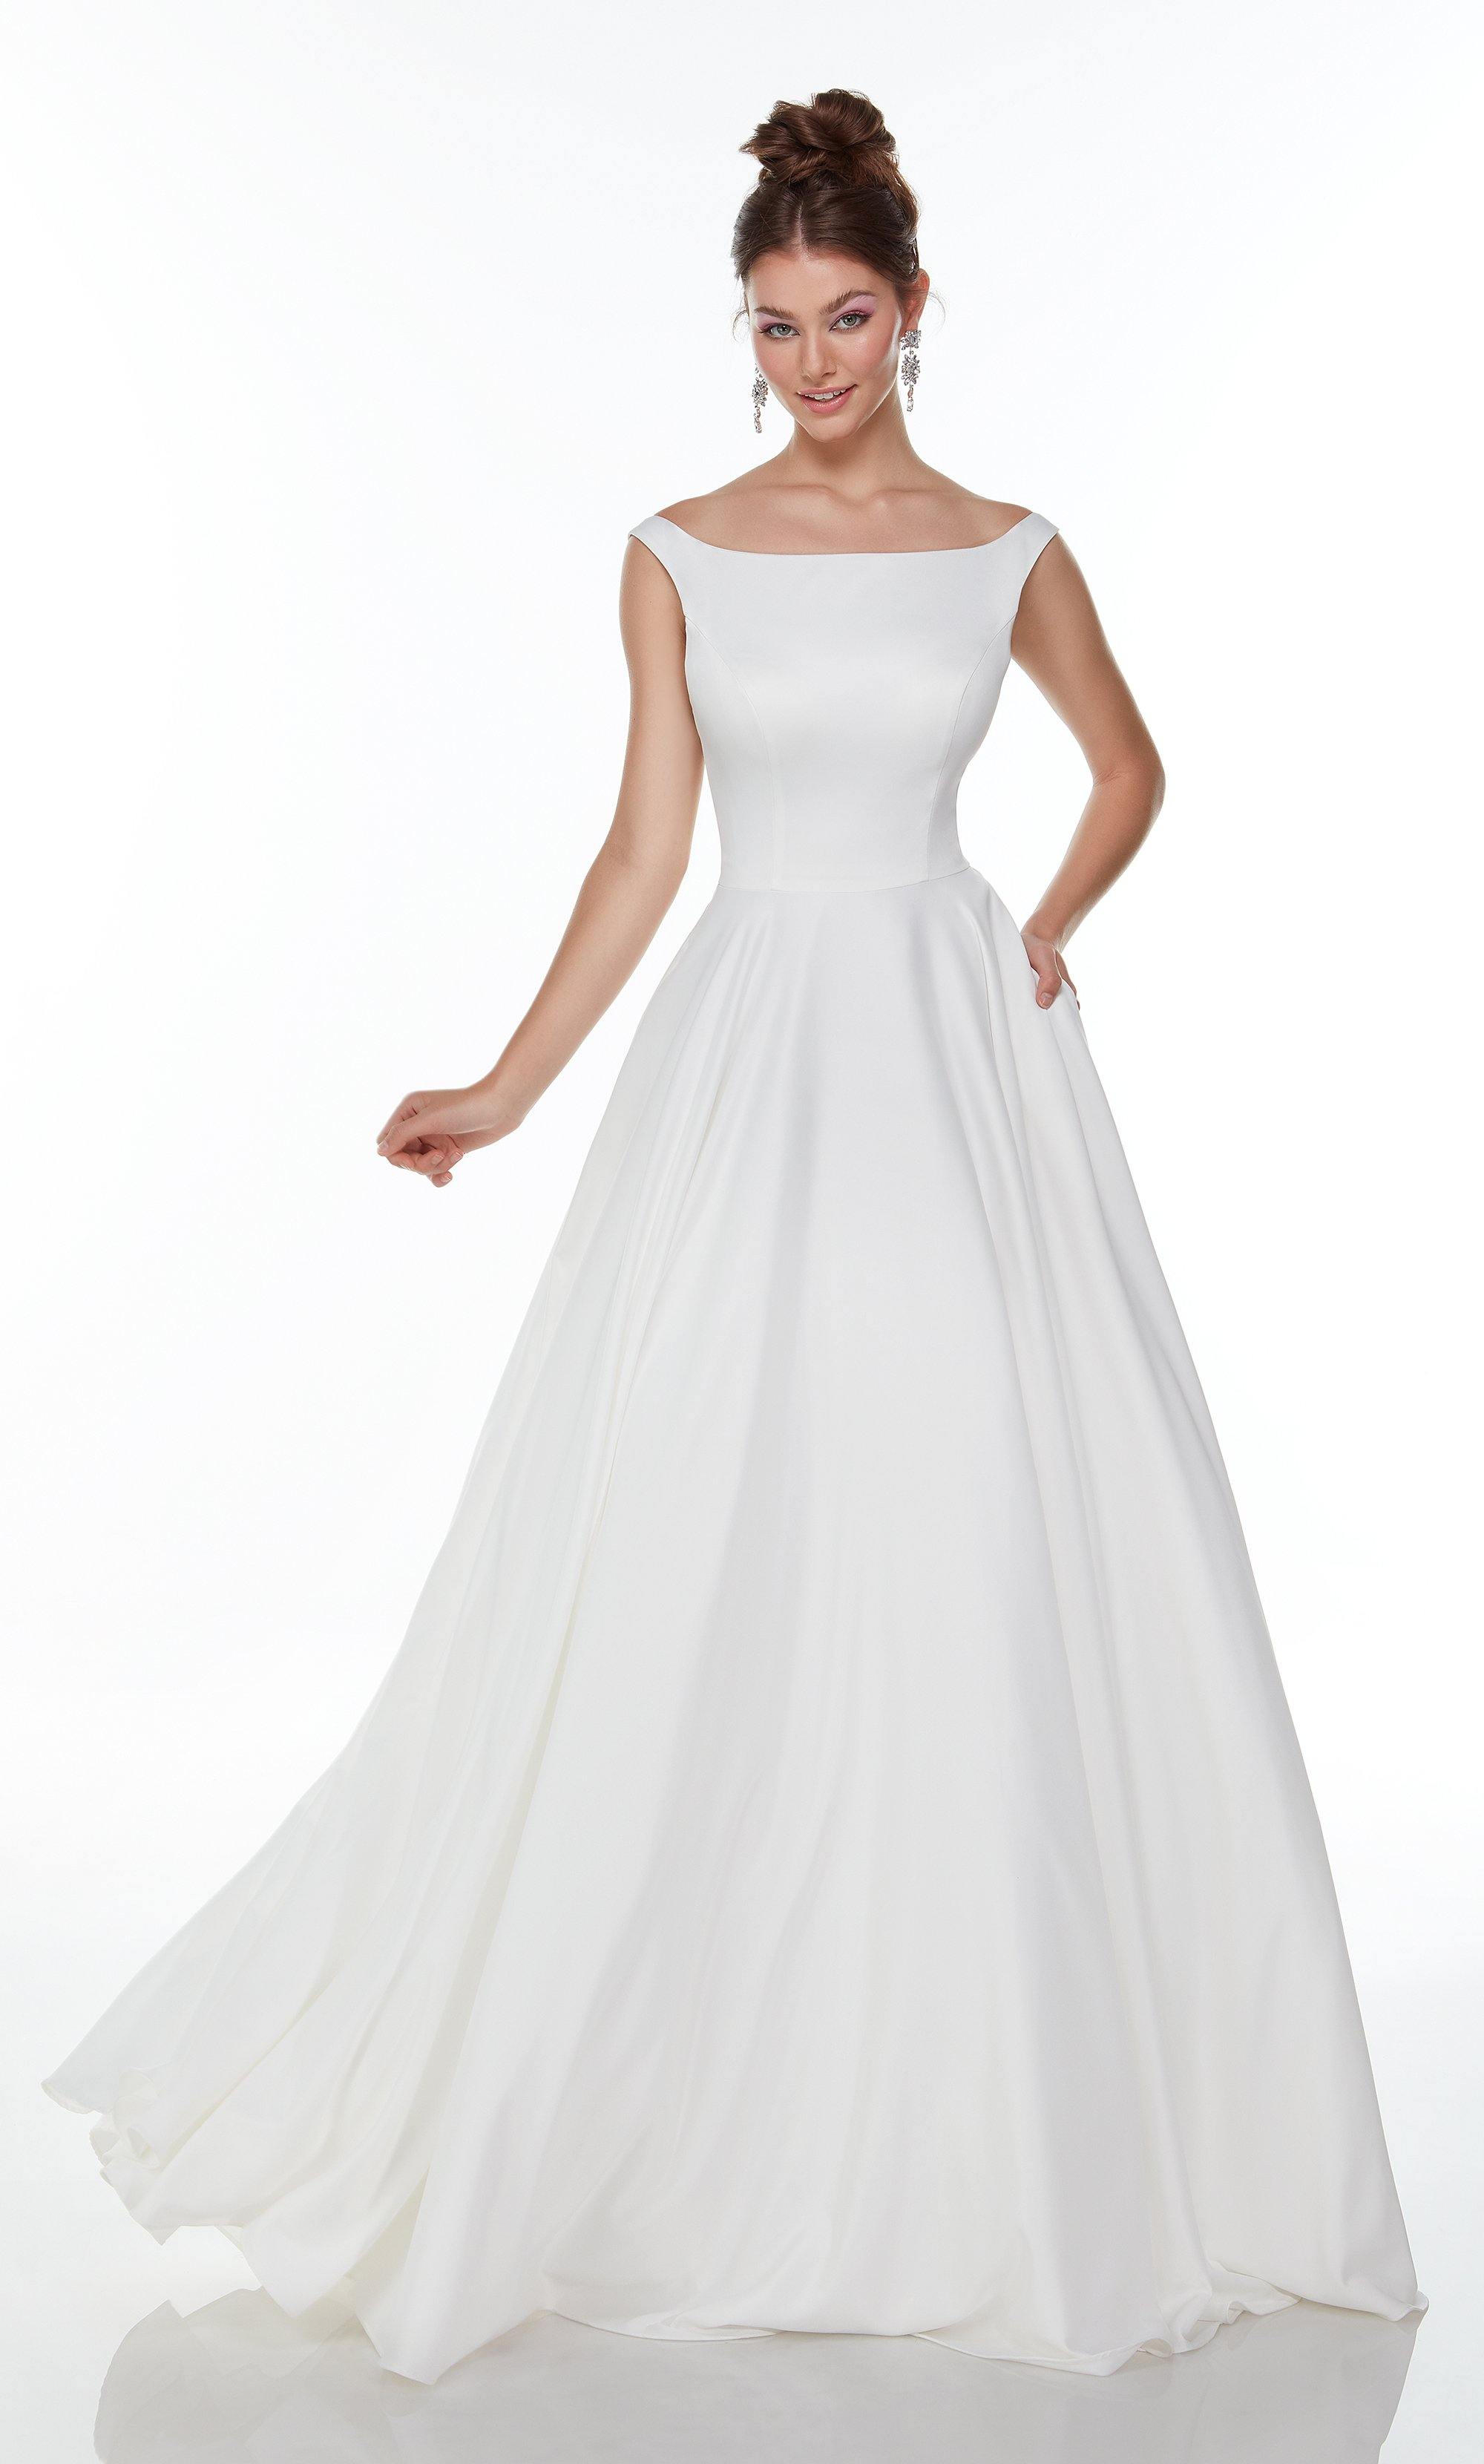 Simple White A Line Chiffon Beach Elopement Wedding Dress With Sleeves -  Ever-Pretty UK